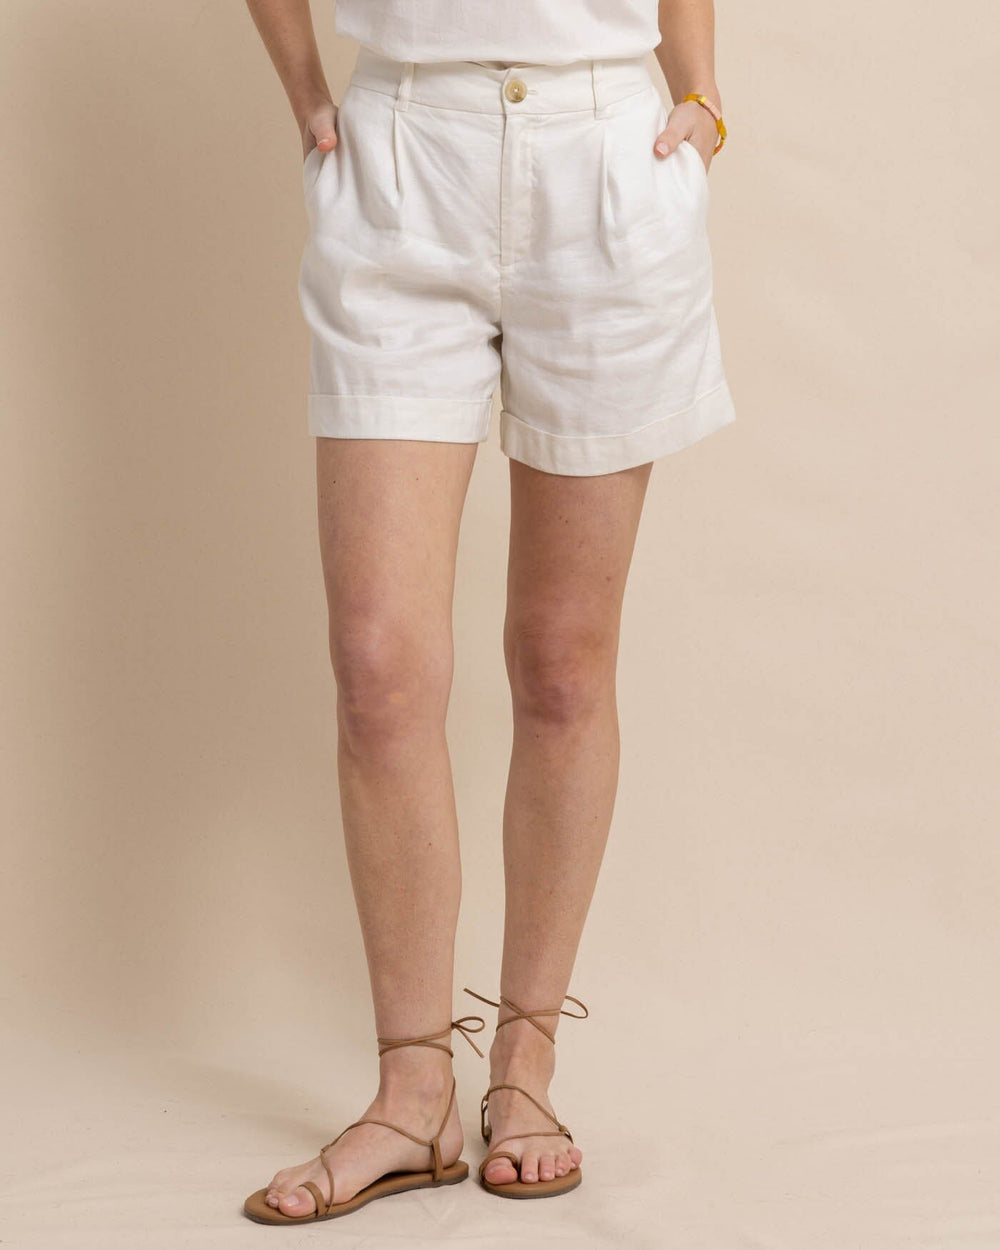 The front view of the Southern Tide Jacey Twill Short by Southern Tide - Sand White